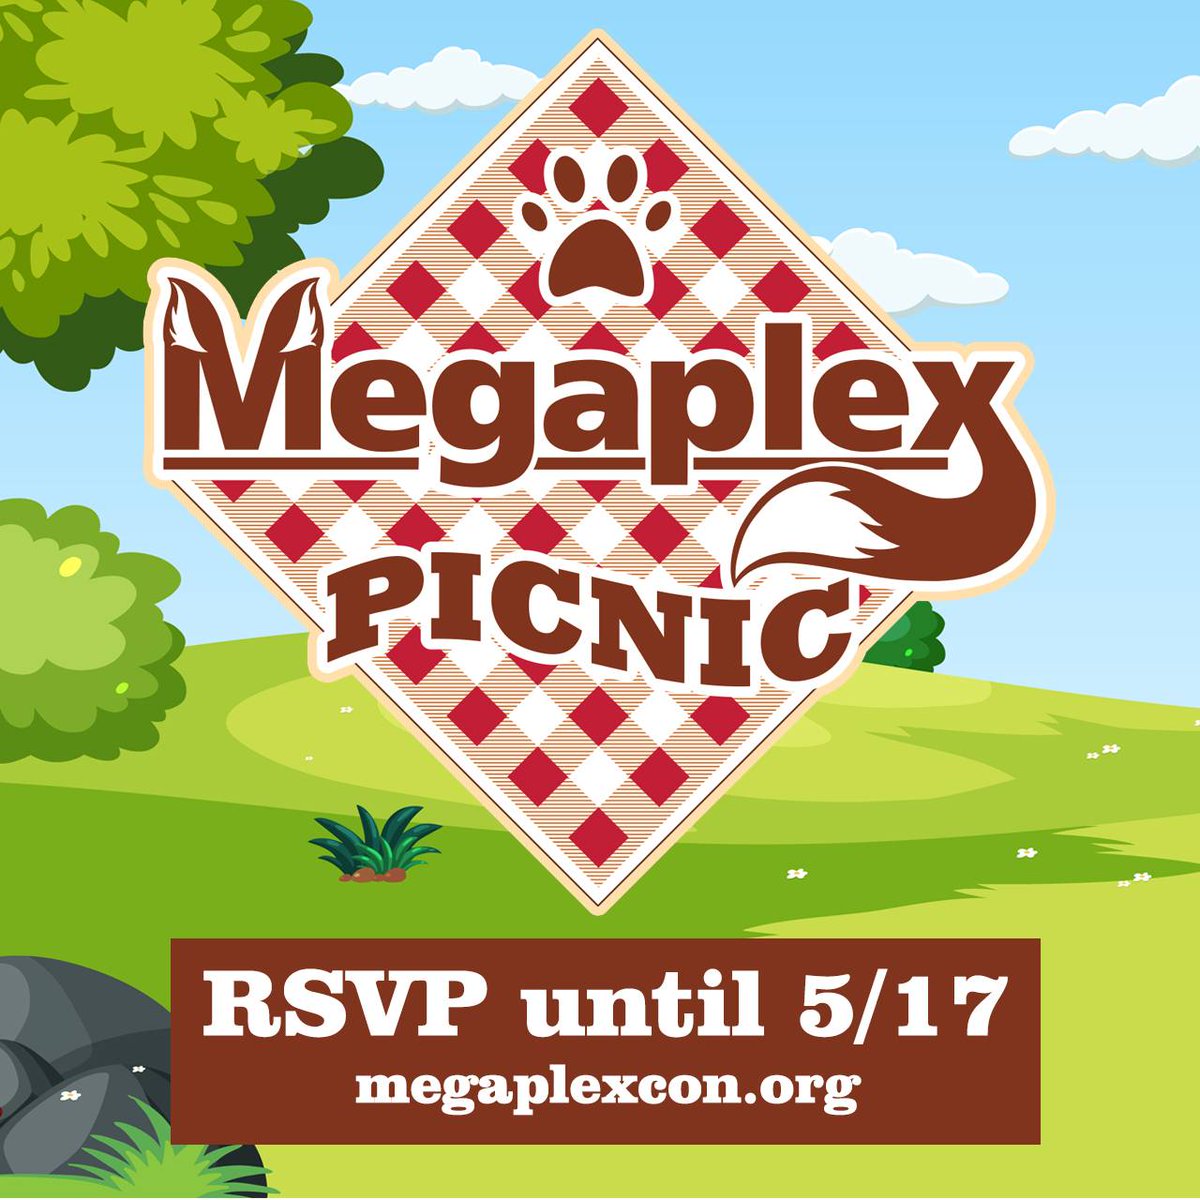 🍔🌭 This is just a friendly reminder to everyone that the 2024 Megaplex Picnic at Bill Frederick Park is fast approaching! The deadline to RSVP is 11:59 PM Eastern on 5/17. Registration is on the website: megaplexcon.org 🍔🌭